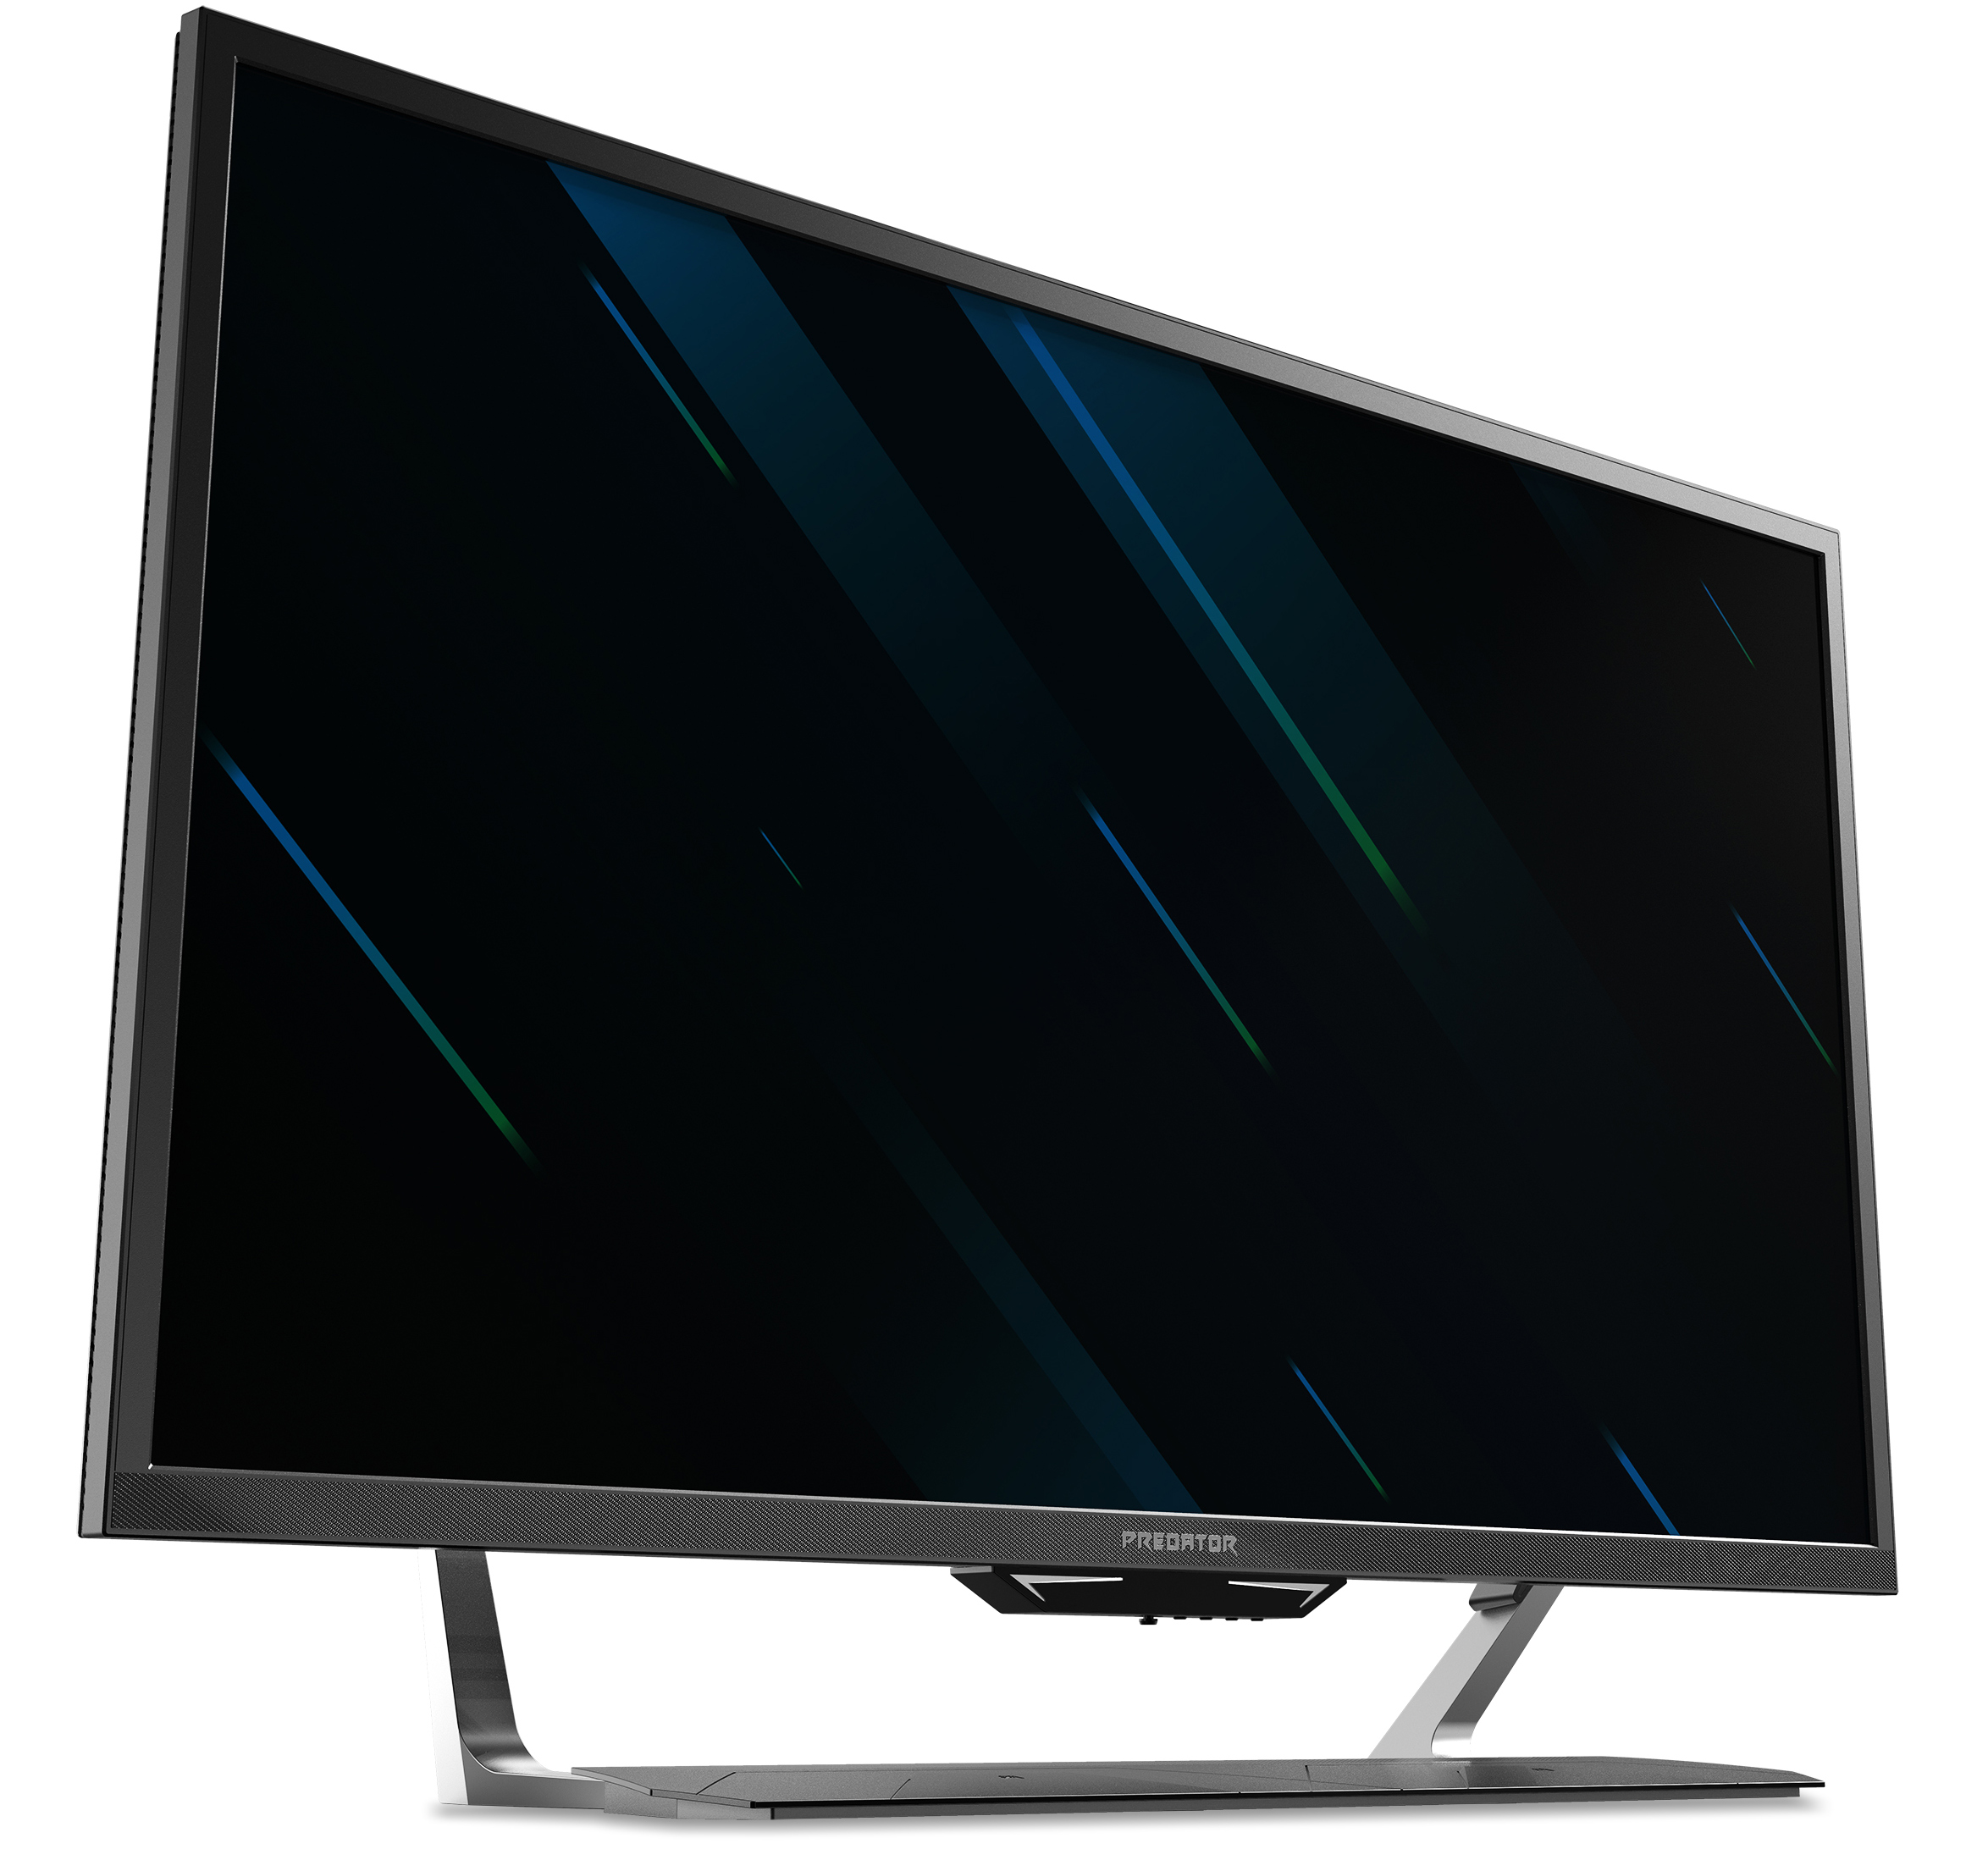 Acer Predator Cg437k P A 43 Inch 144 Hz Gaming Monitor With Freesync And Displayhdr 1000